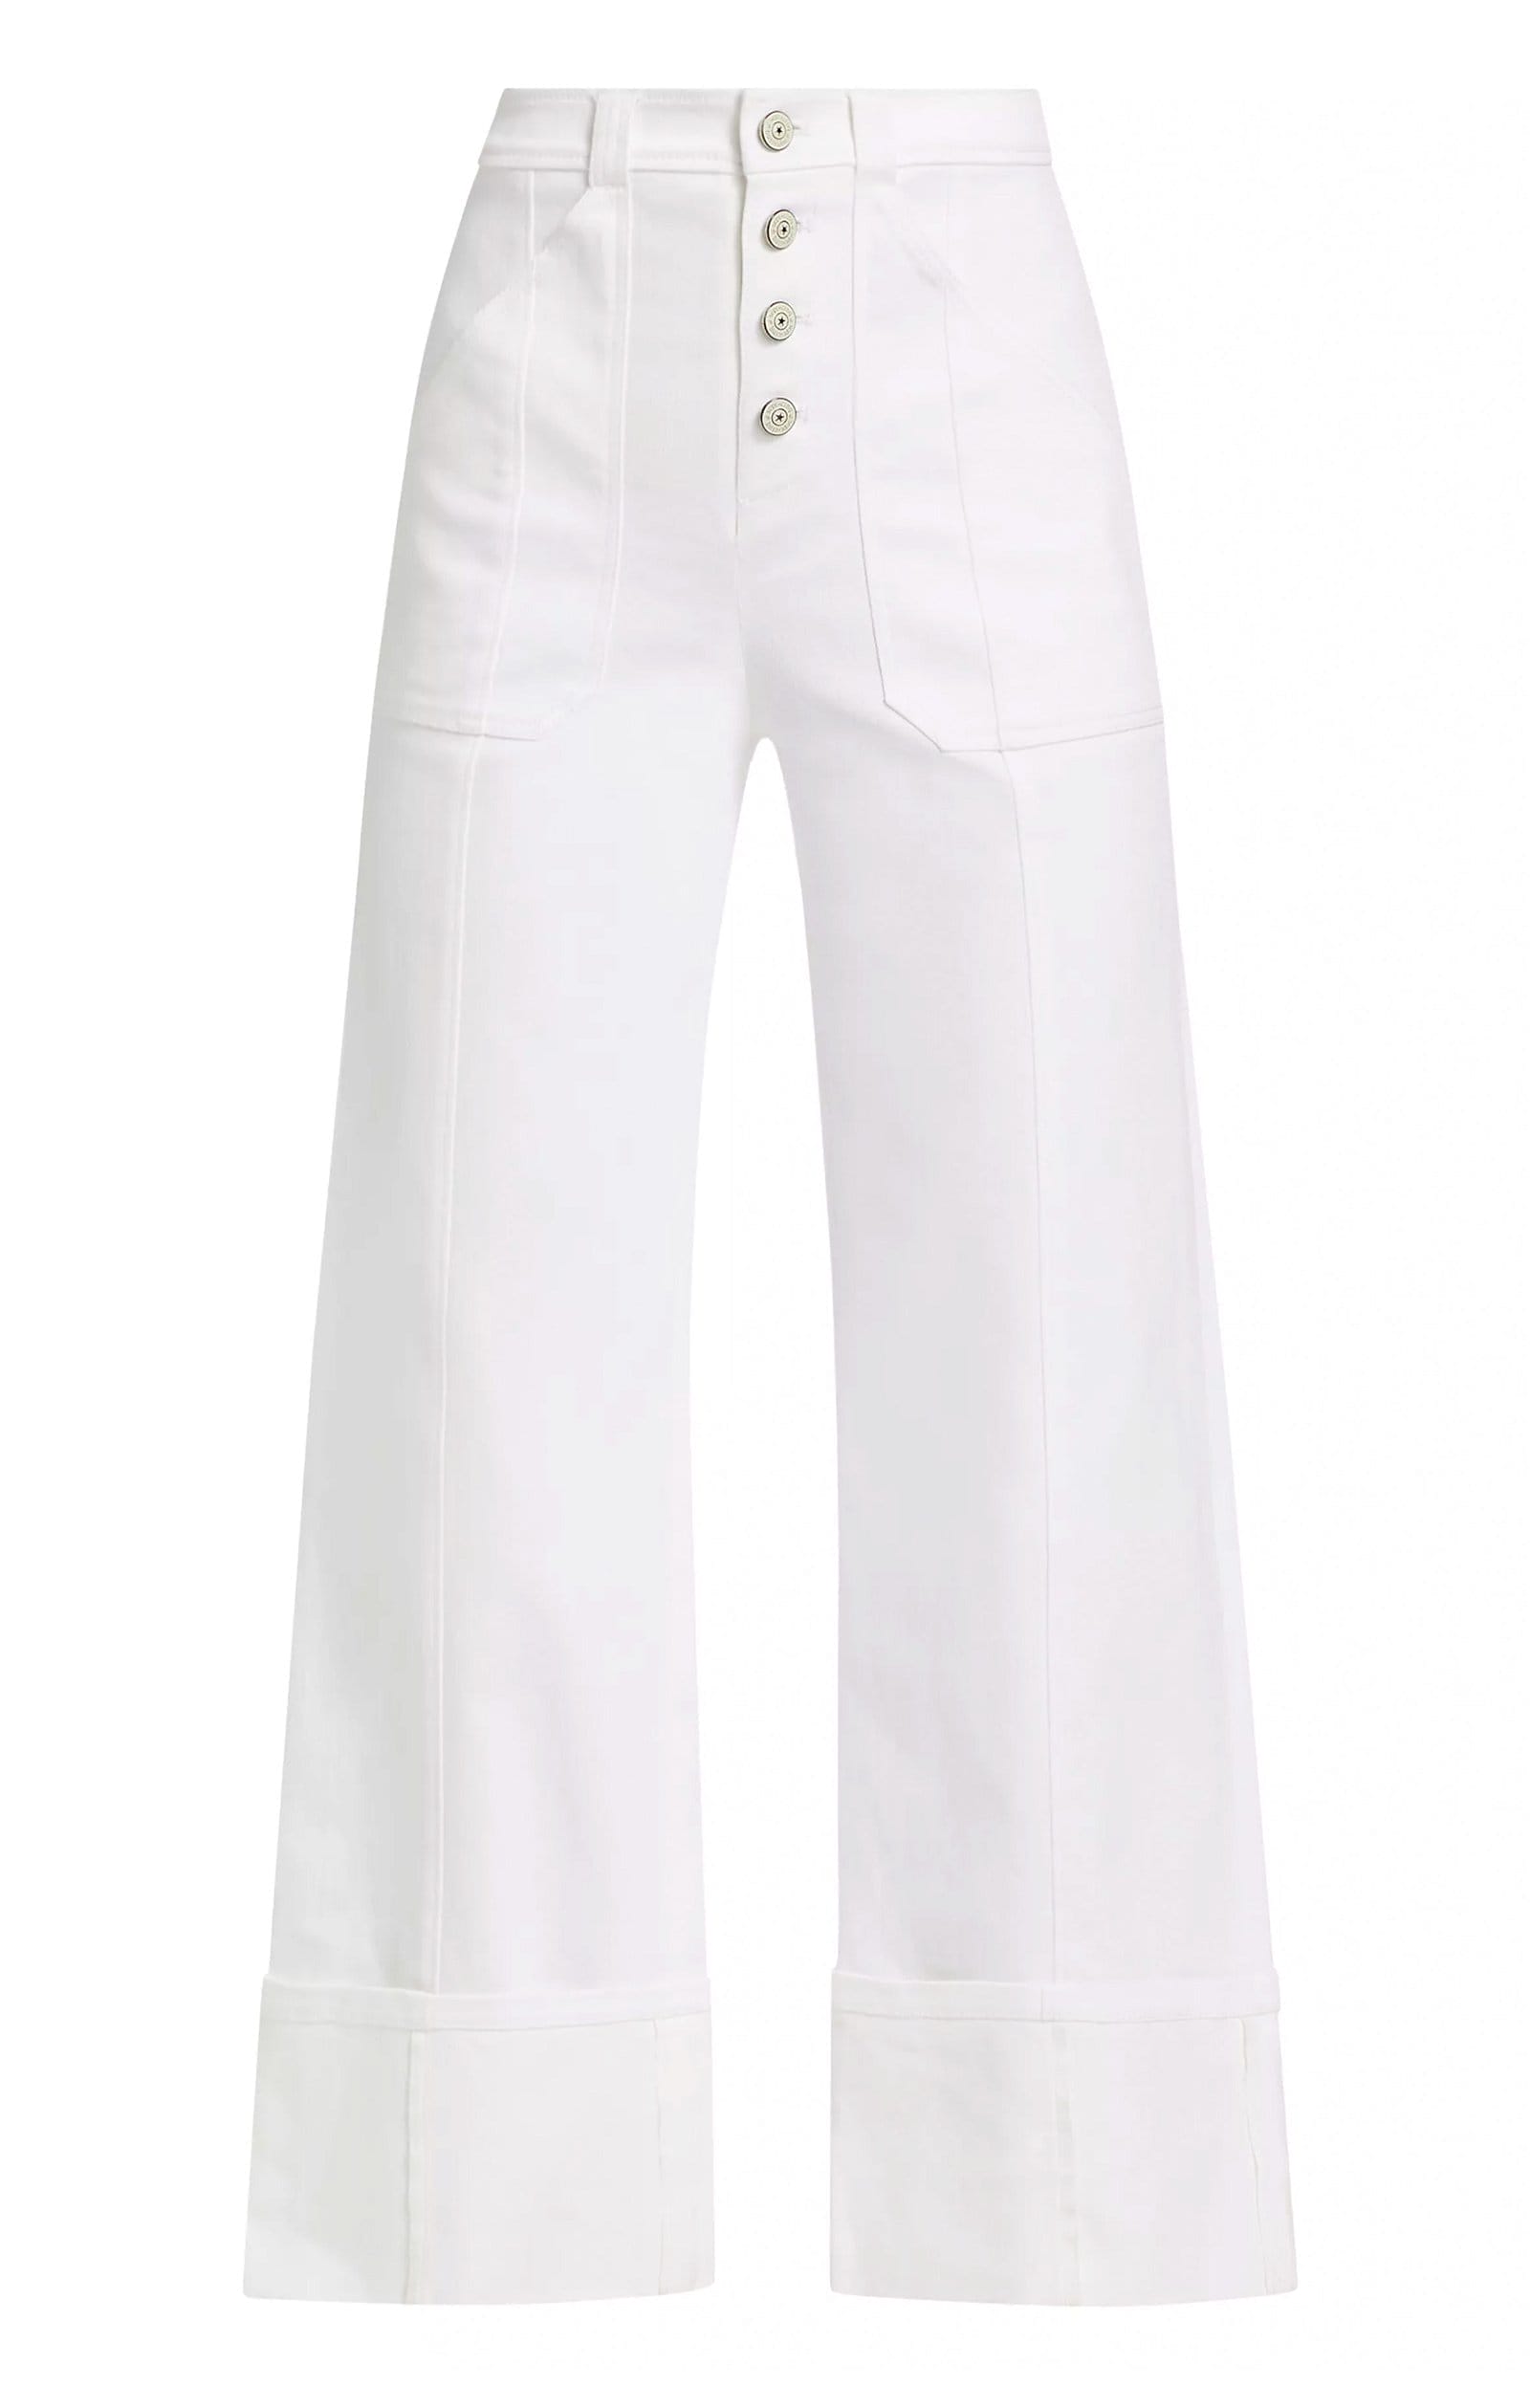 https://cinqasept.nyc/collections/most-wanted/products/cuffed-benji-pant-in-white